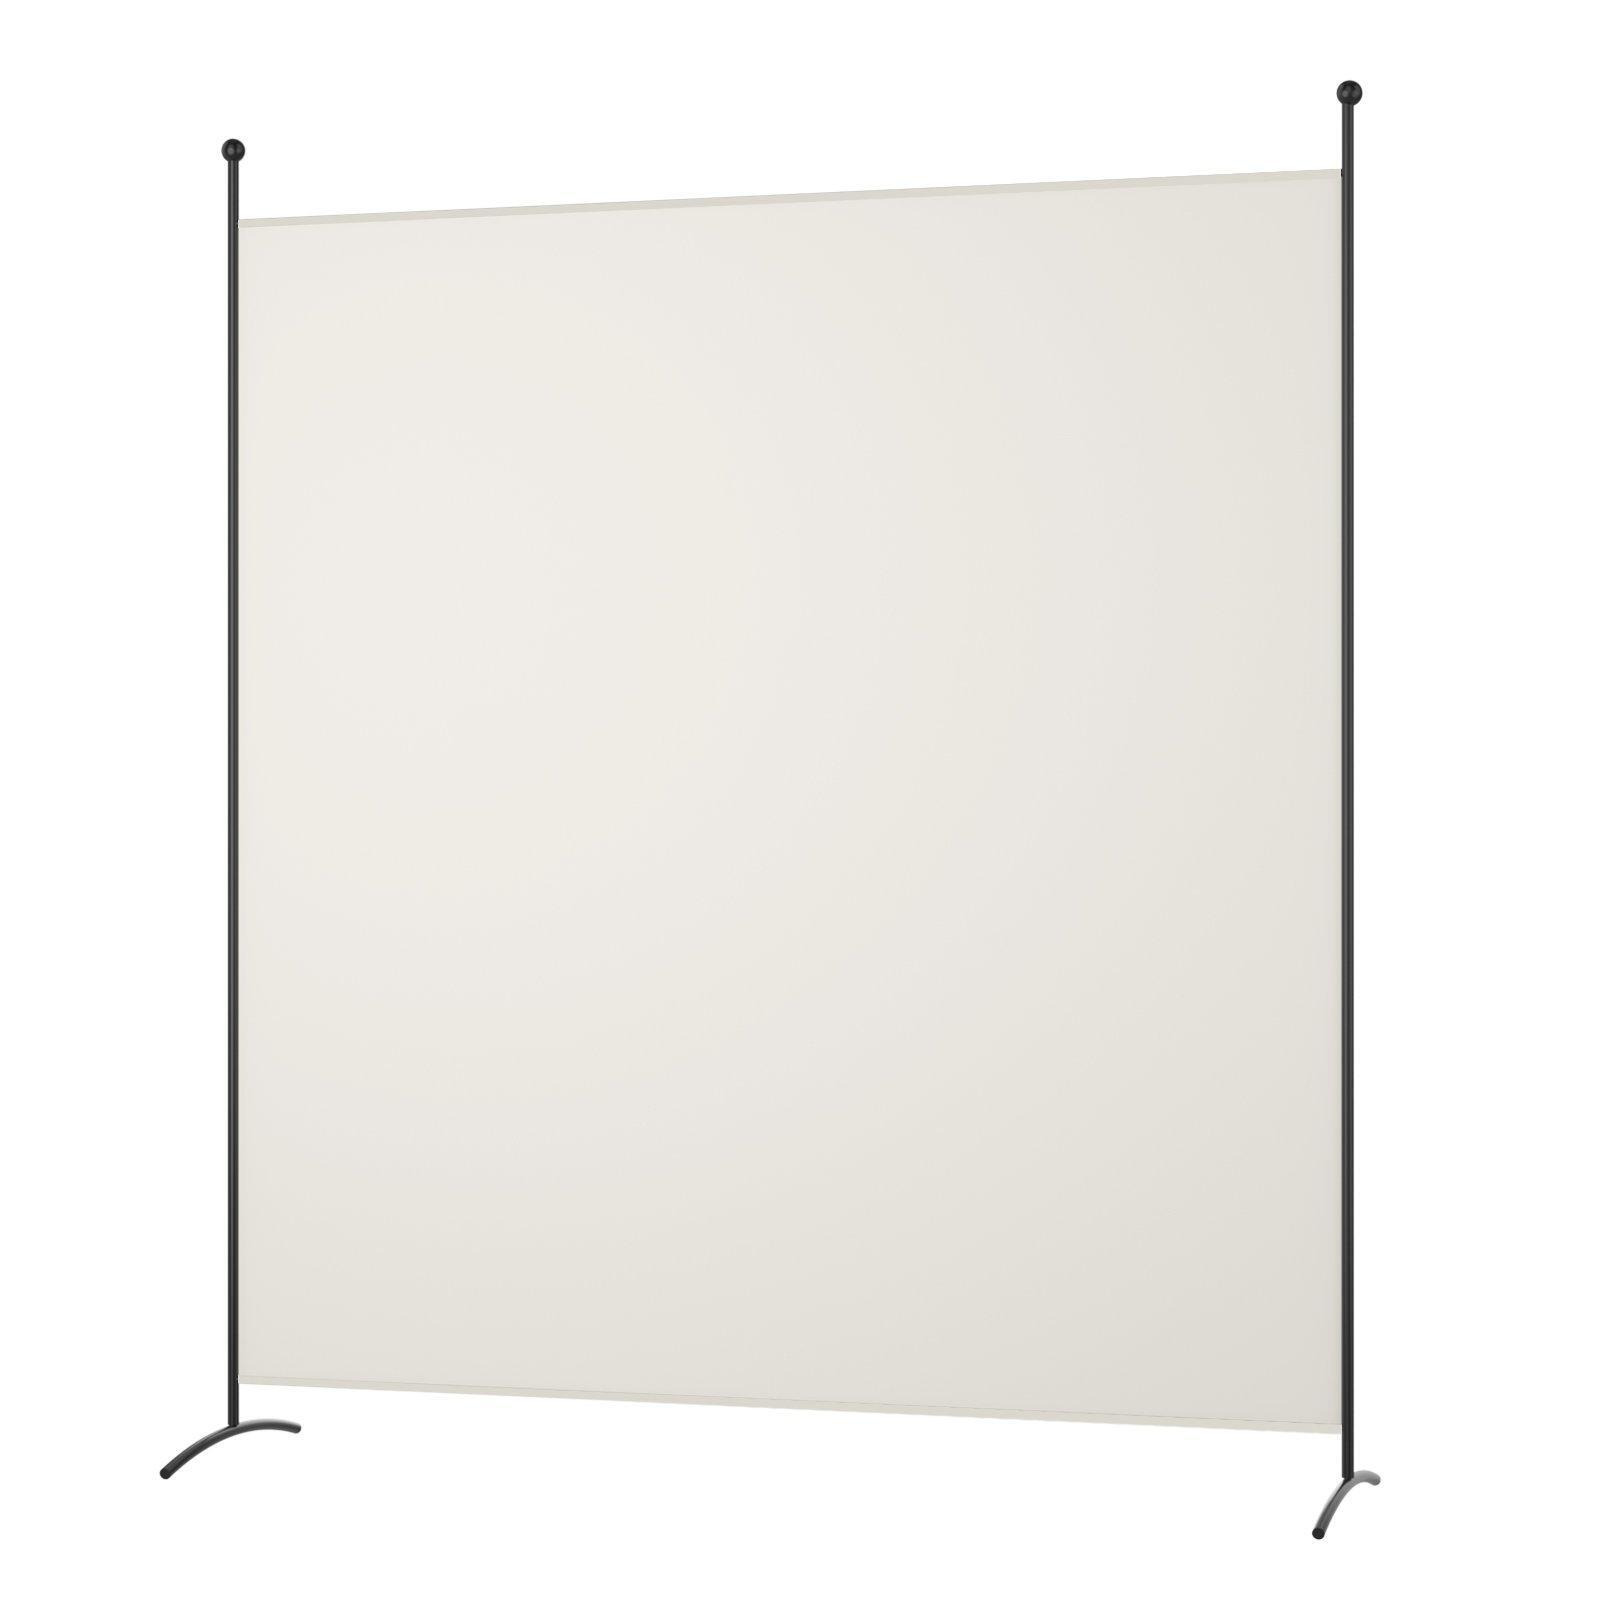 Folding Room Divider 1/4 Panel Freestanding Wall Privacy Screen Protector - image 1